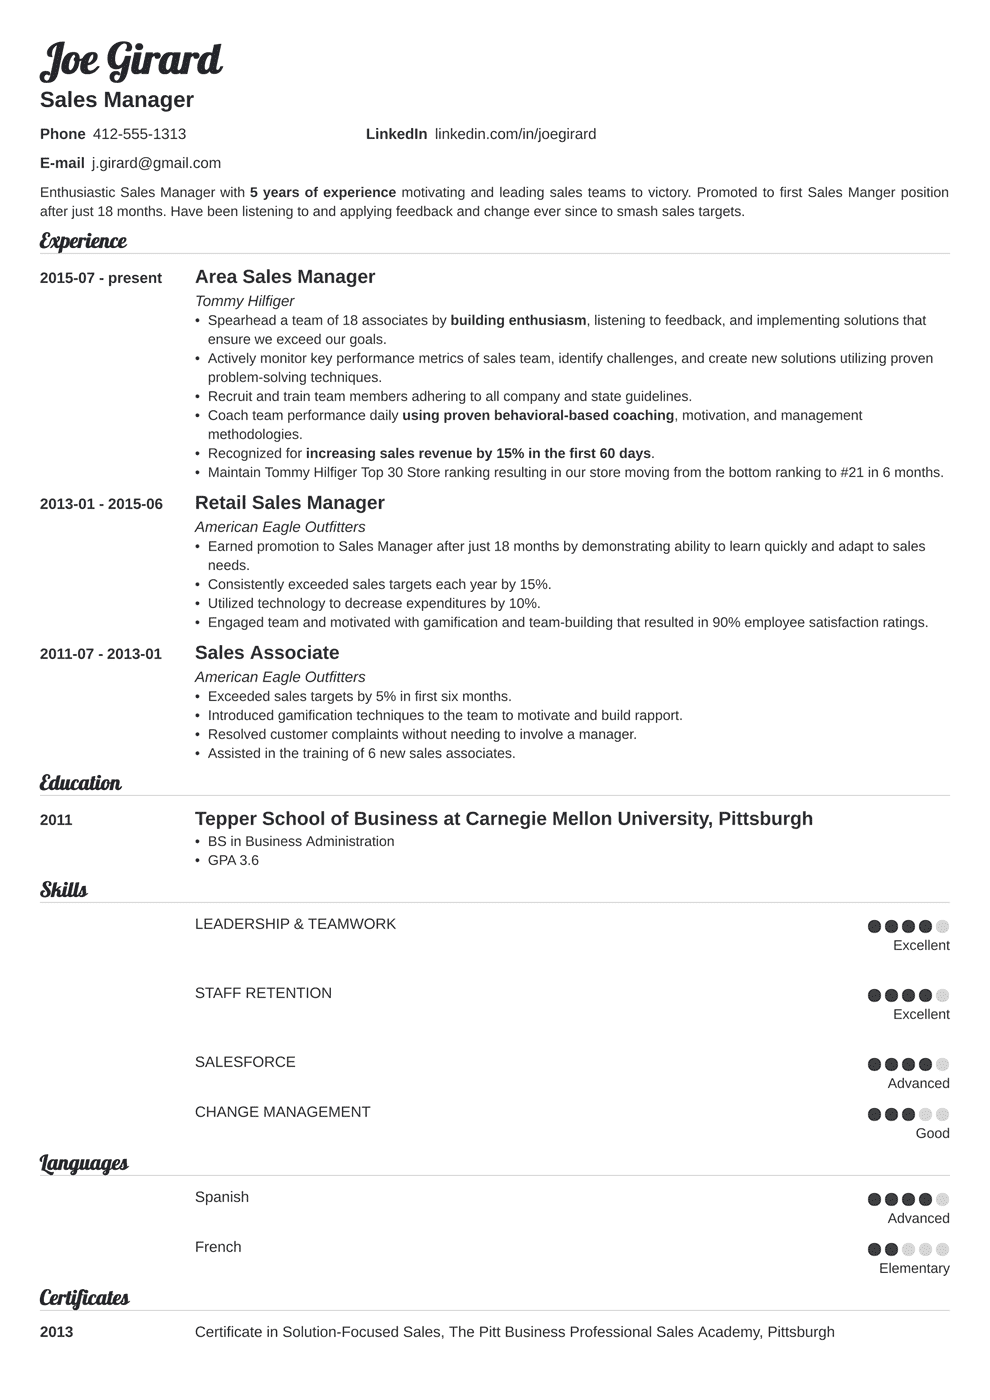 Sales Manager Resume Examples [Templates & Key Skills]